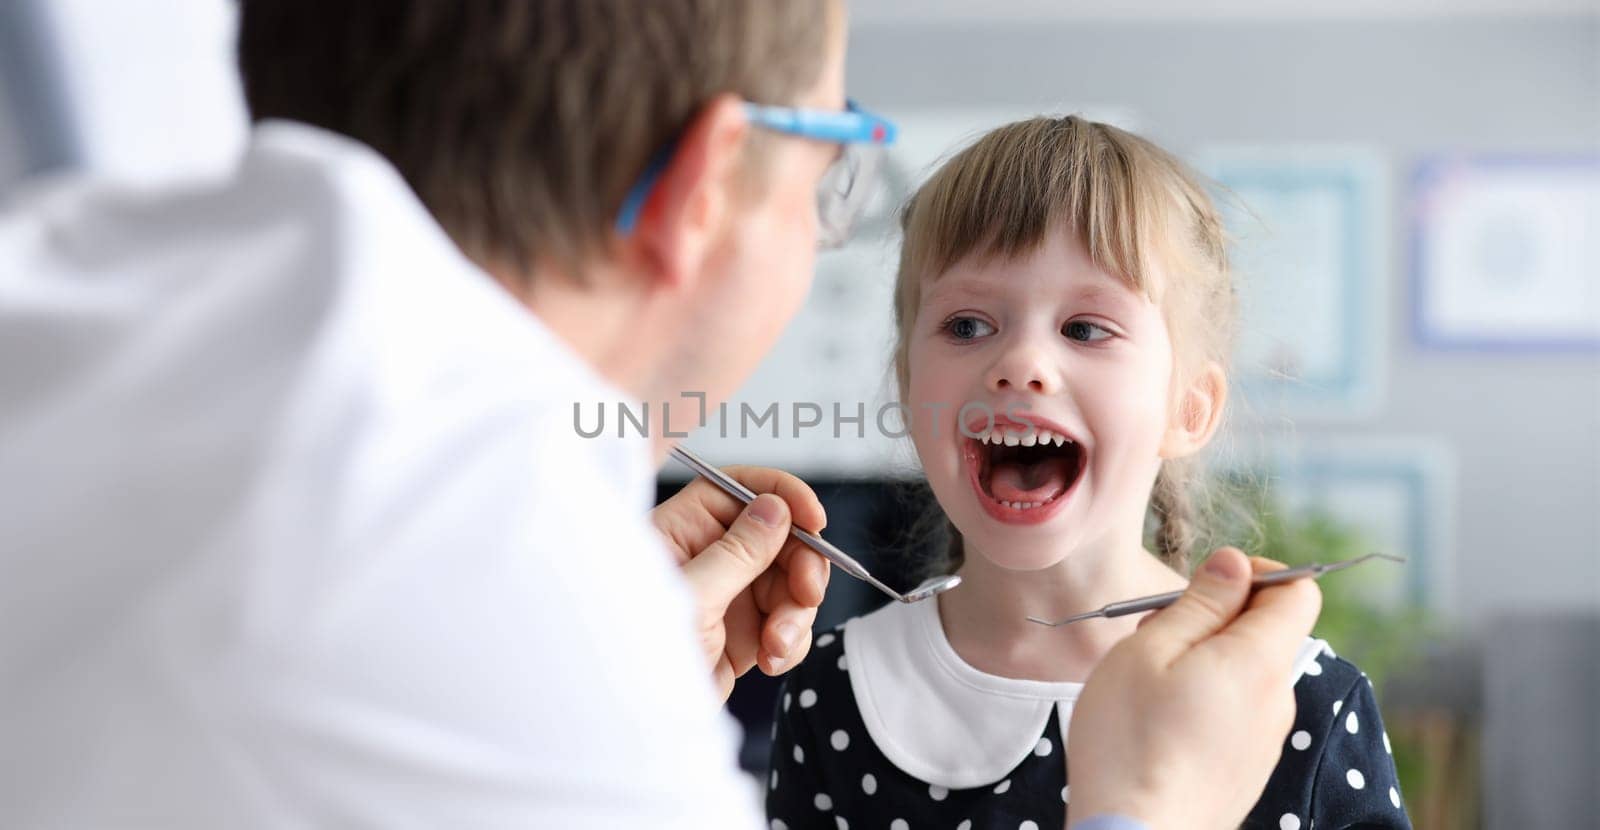 Male dentist look at open mouth litle happy girl child againlt hospital office background portrait. Tooth treatment concept